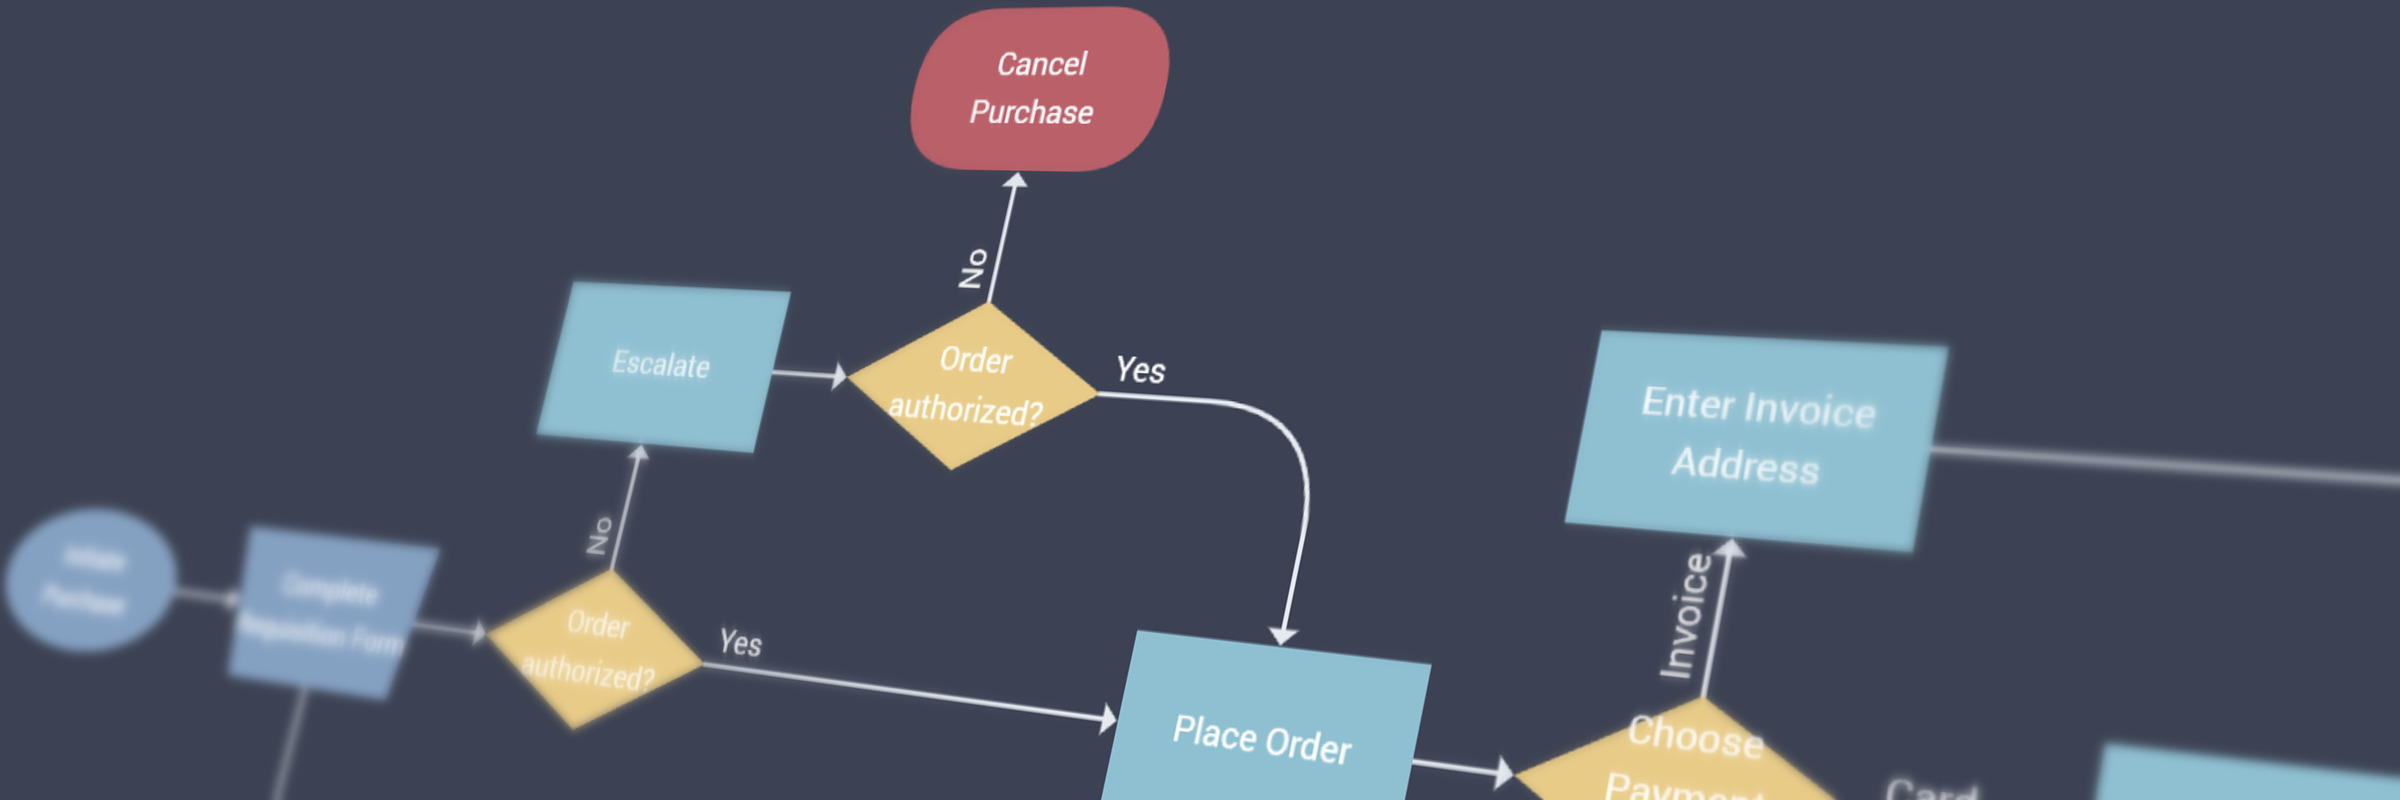 Hero image for Interactive Decision Tree Diagrams